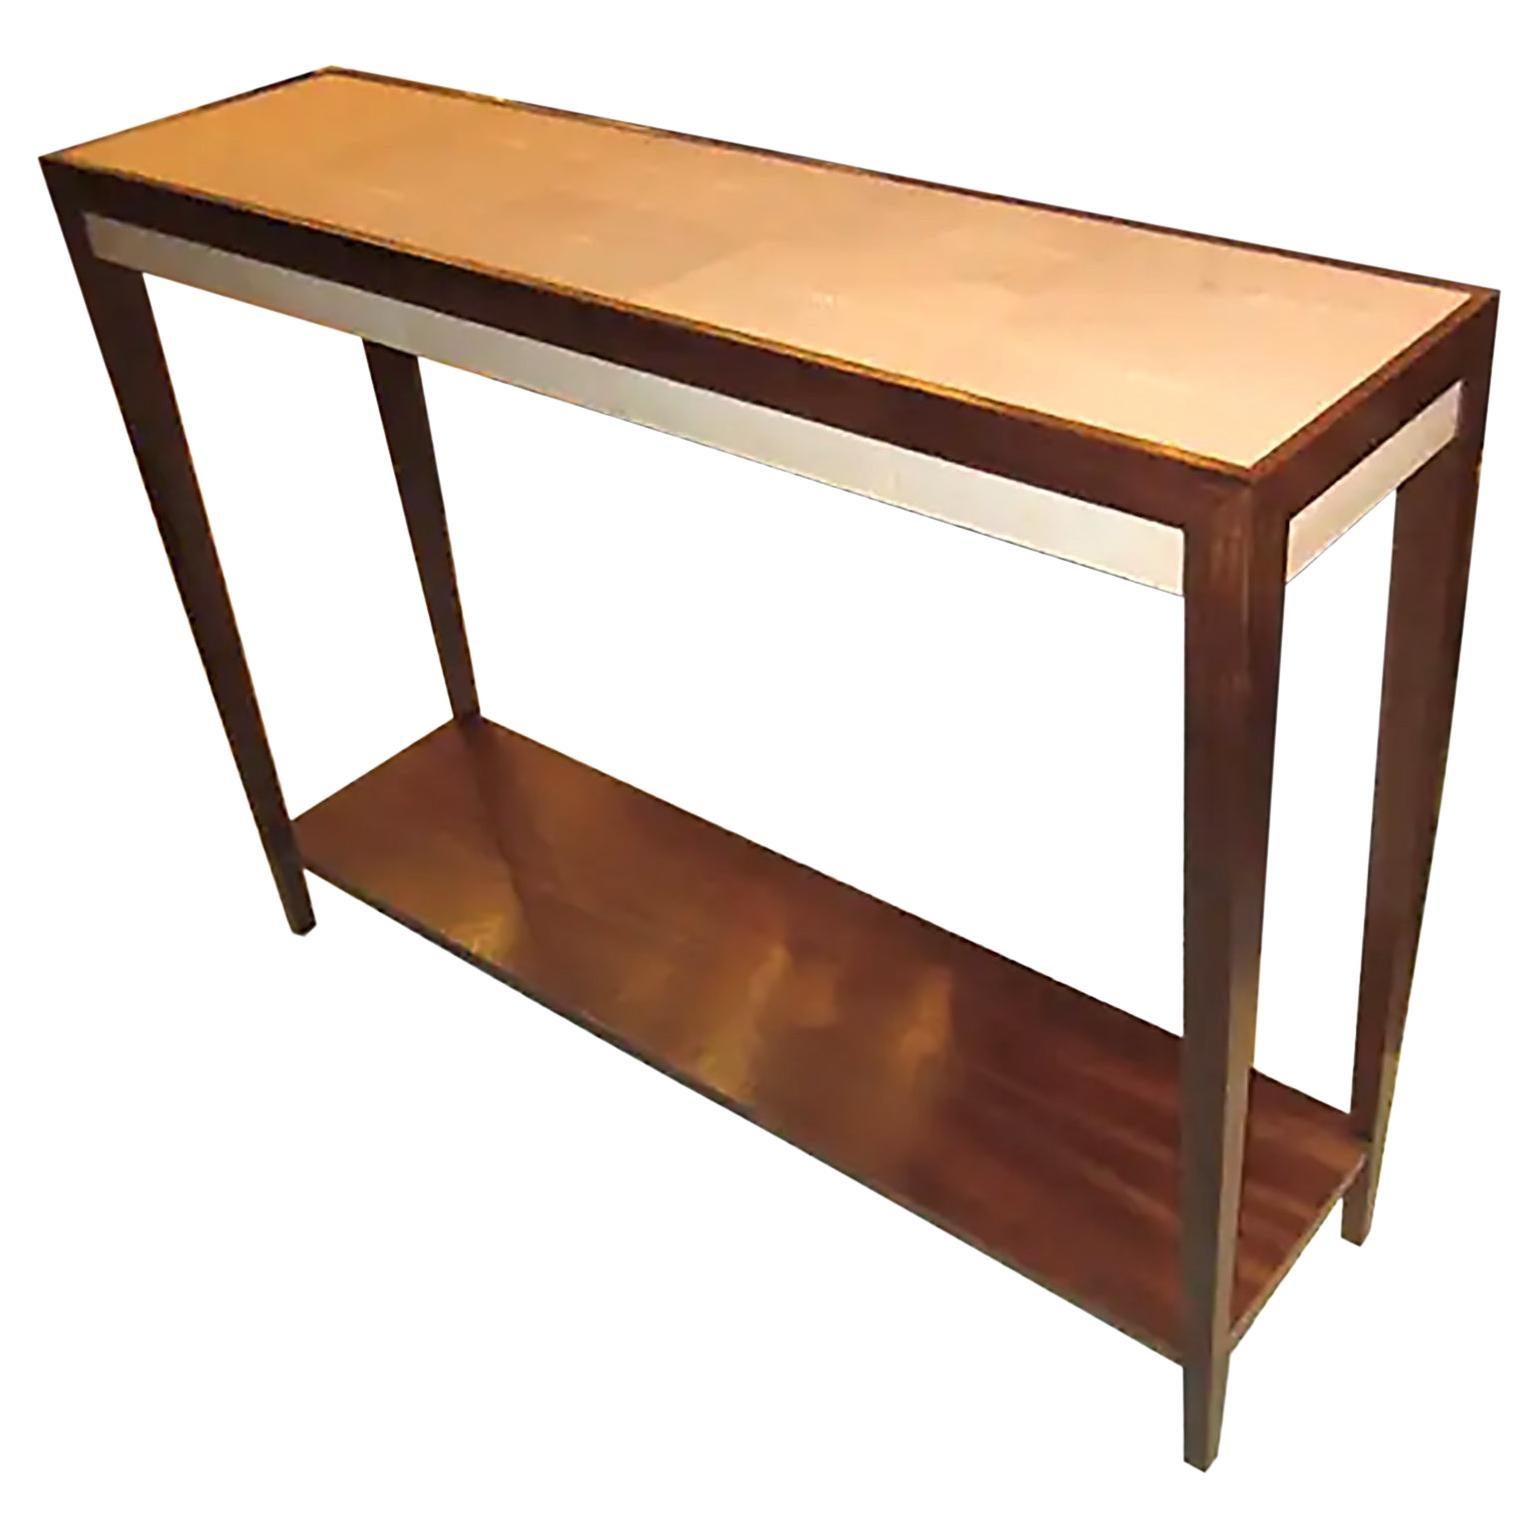 Custom Mahogany Console with Shagreen Top in the Jean-Michel Frank Manner